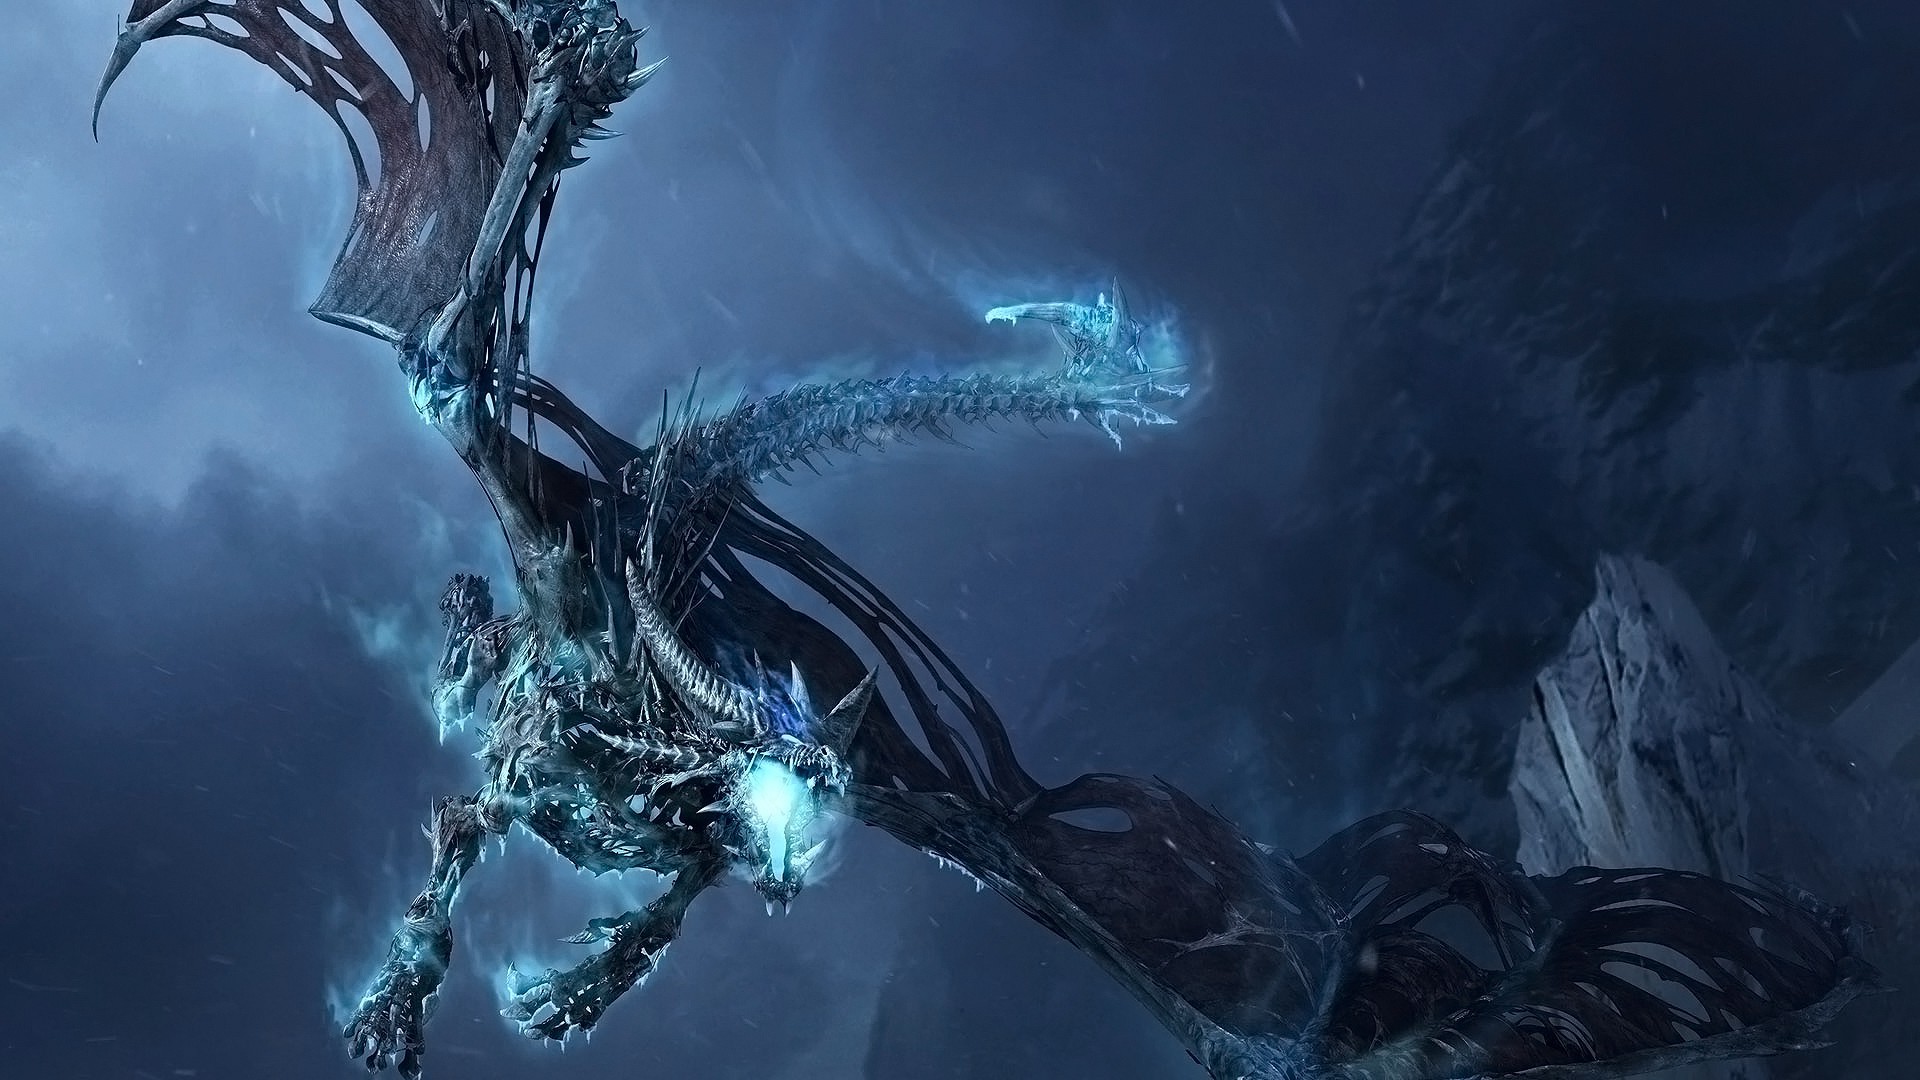 dragon, World Of Warcraft, World Of Warcraft: Wrath Of The Lich King Wallpaper